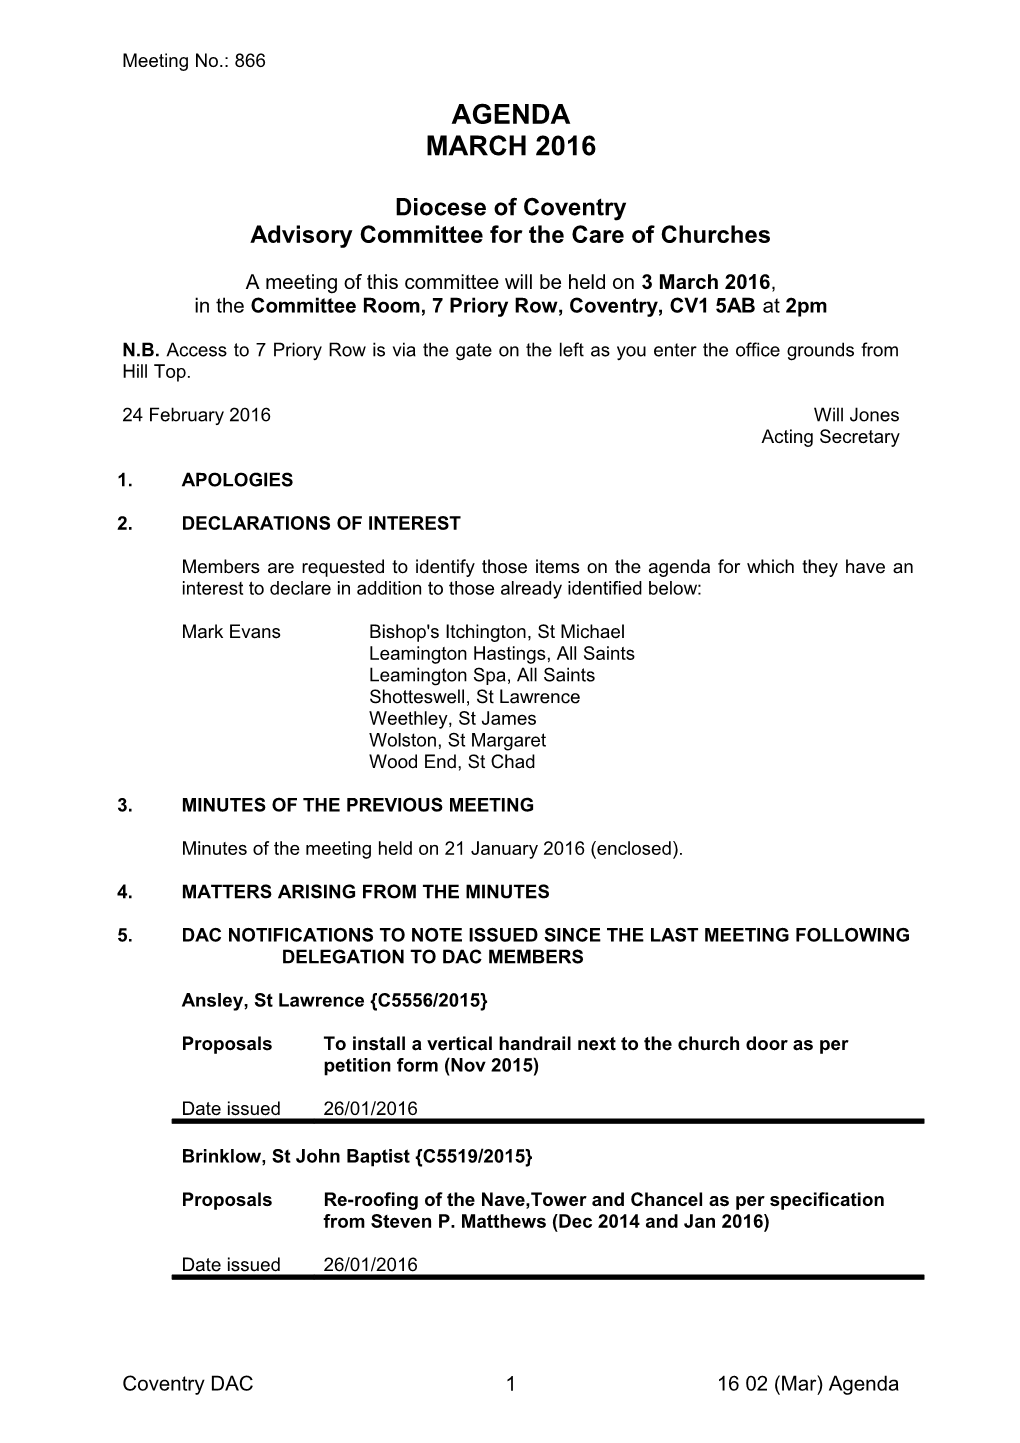 Advisory Committee for the Care of Churches